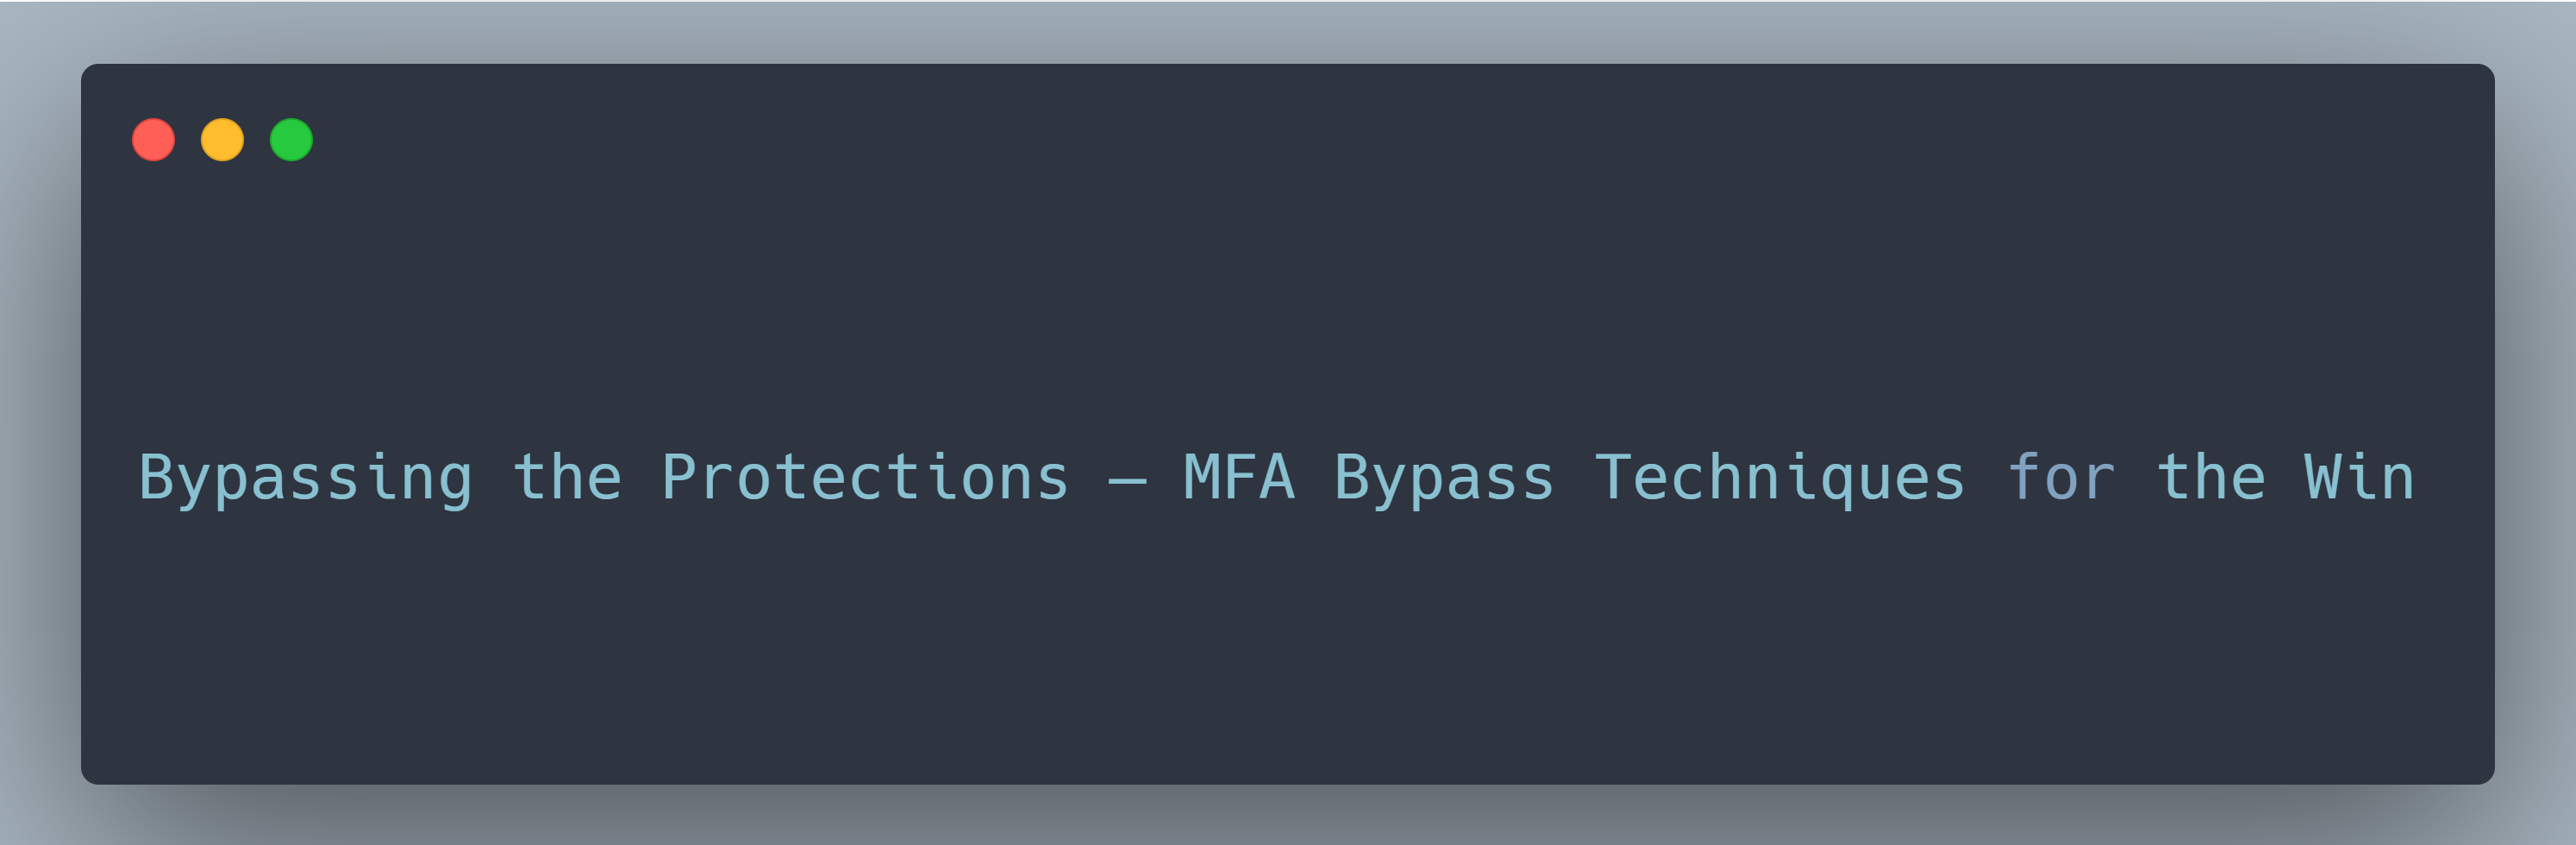 Bypassing the Protections — MFA Bypass Techniques for the Win